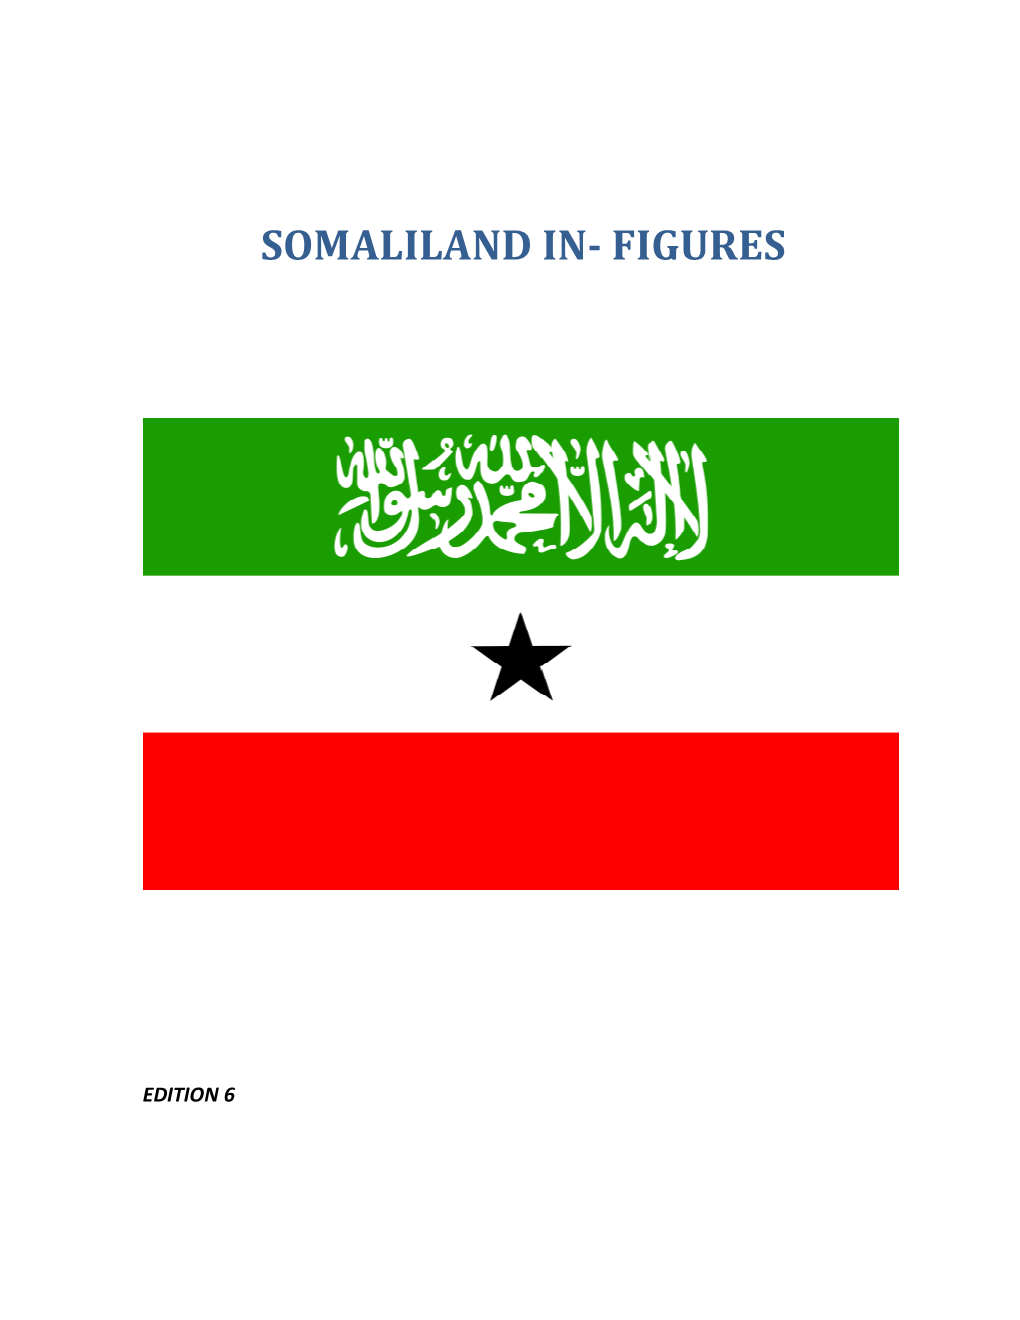 Somaliland In- Figures